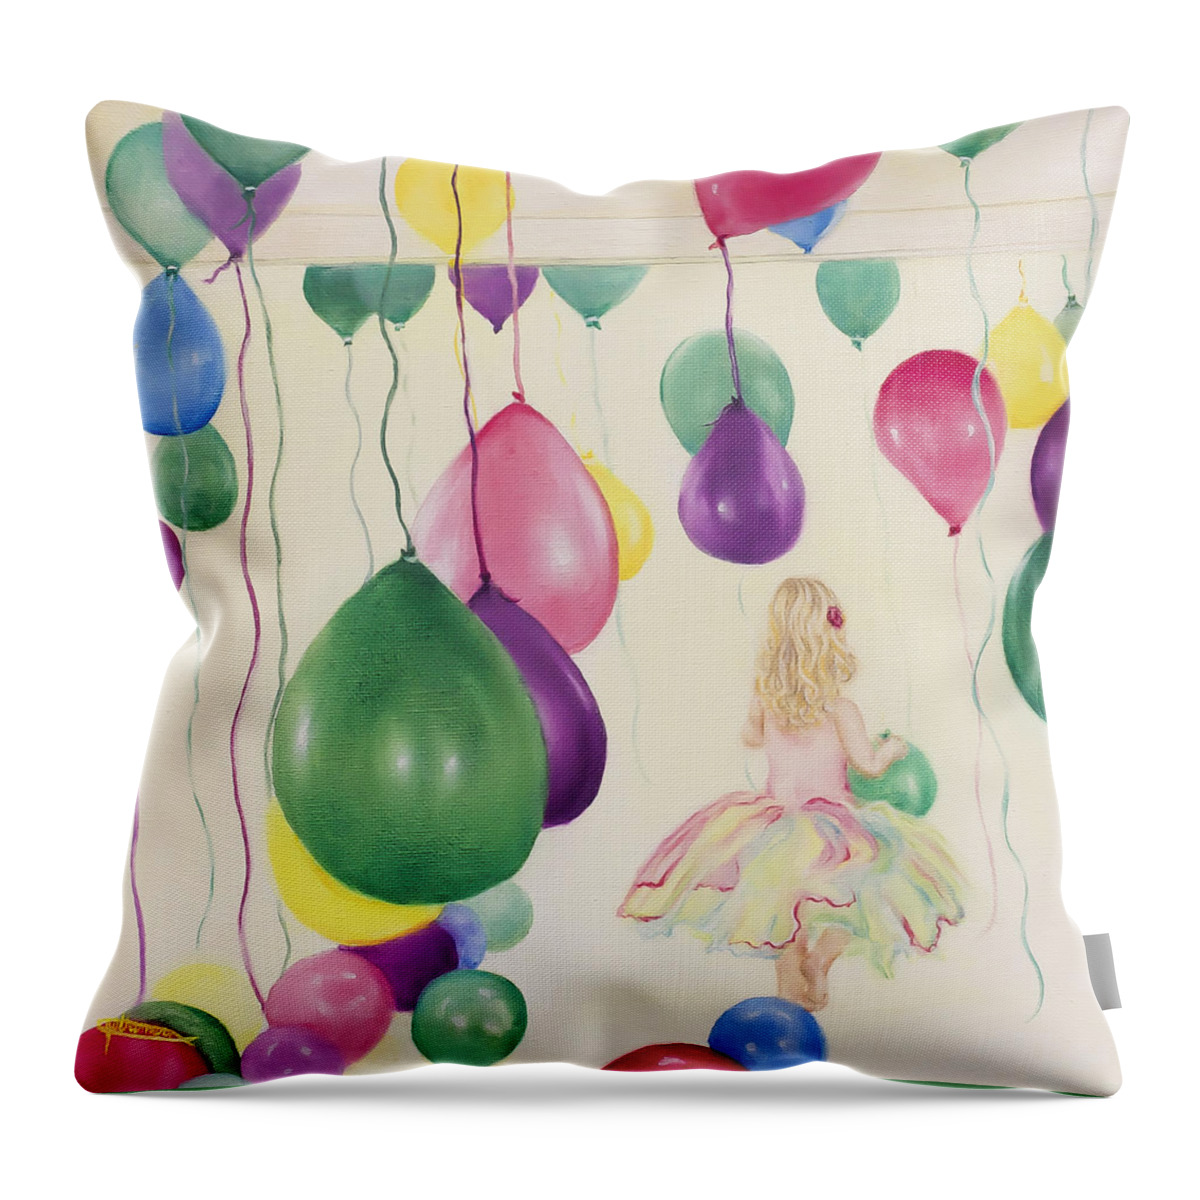 Prophetic Art Throw Pillow featuring the painting Celebrate by Jeanette Sthamann